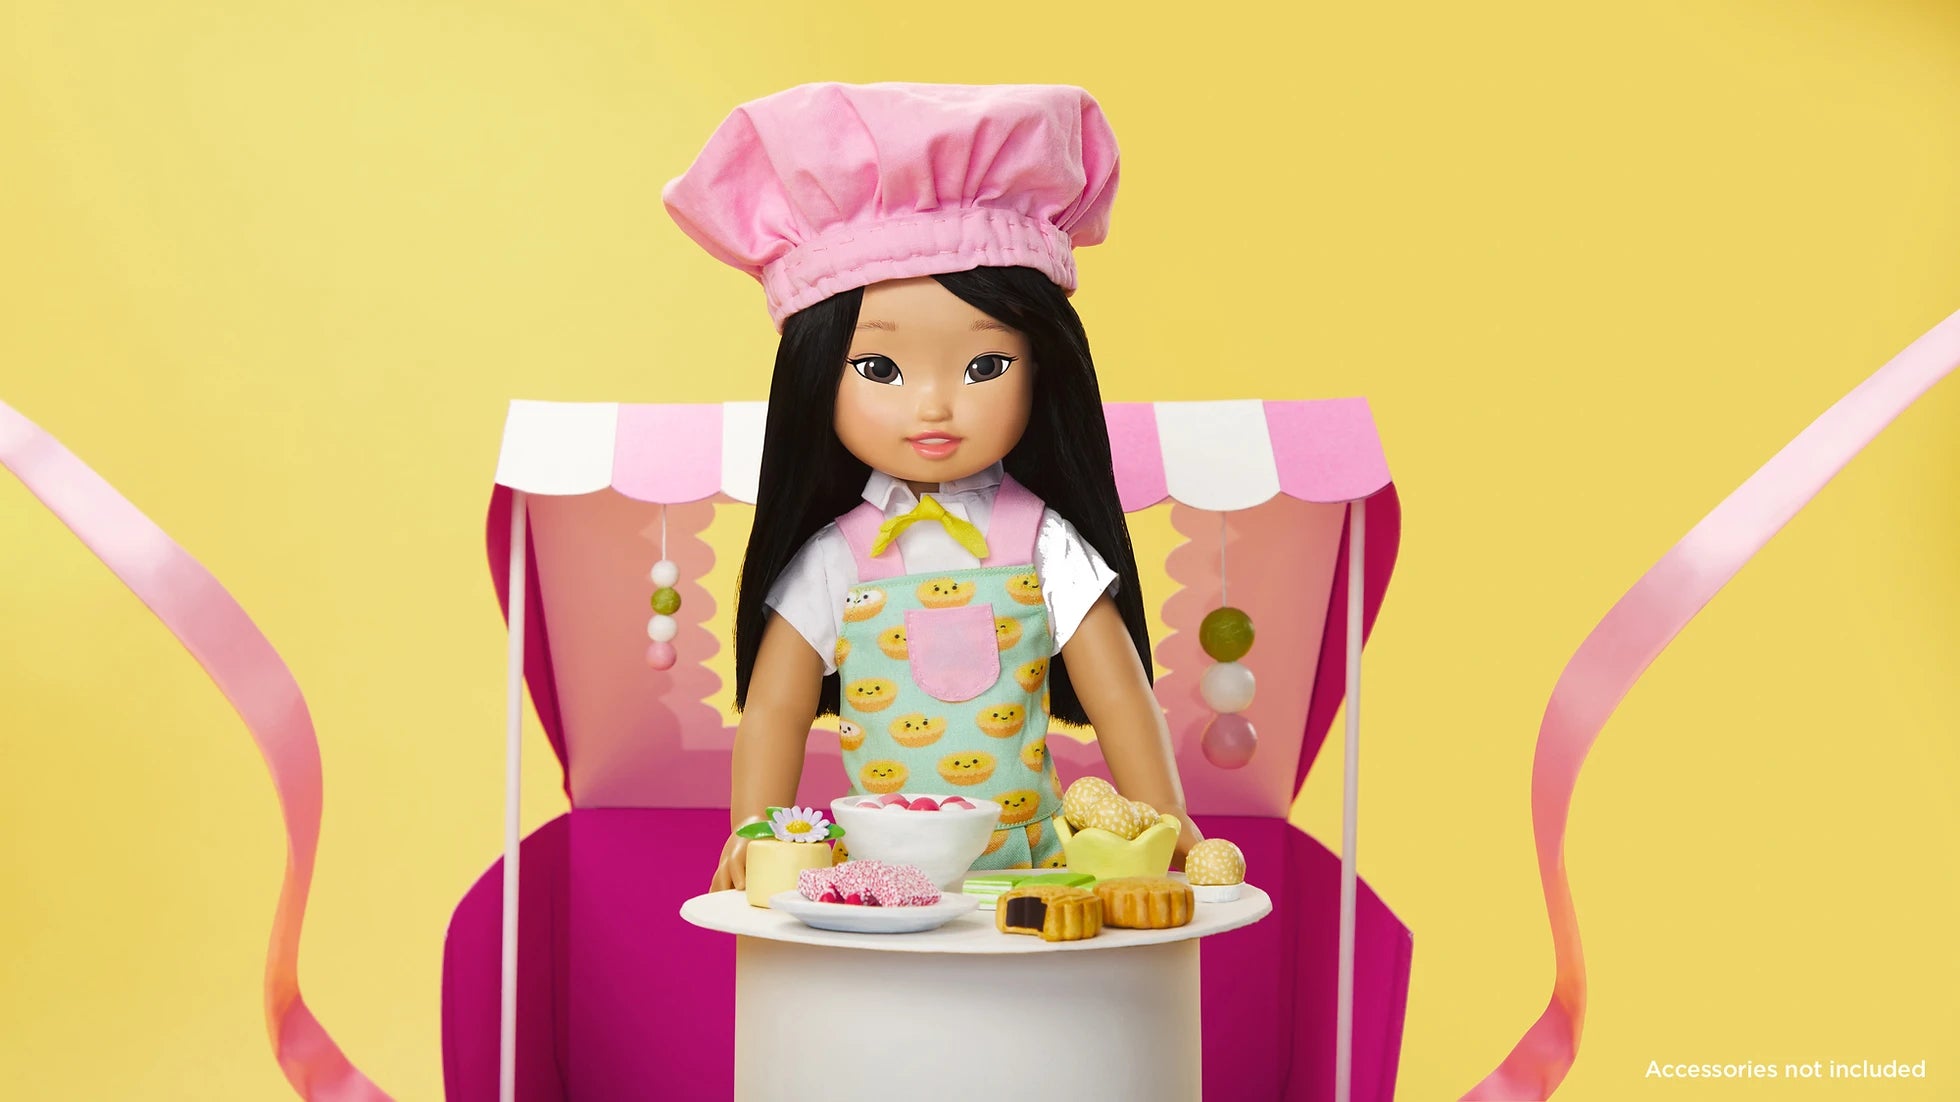 The Jilly Bing doll wearing a chef's hat with play food